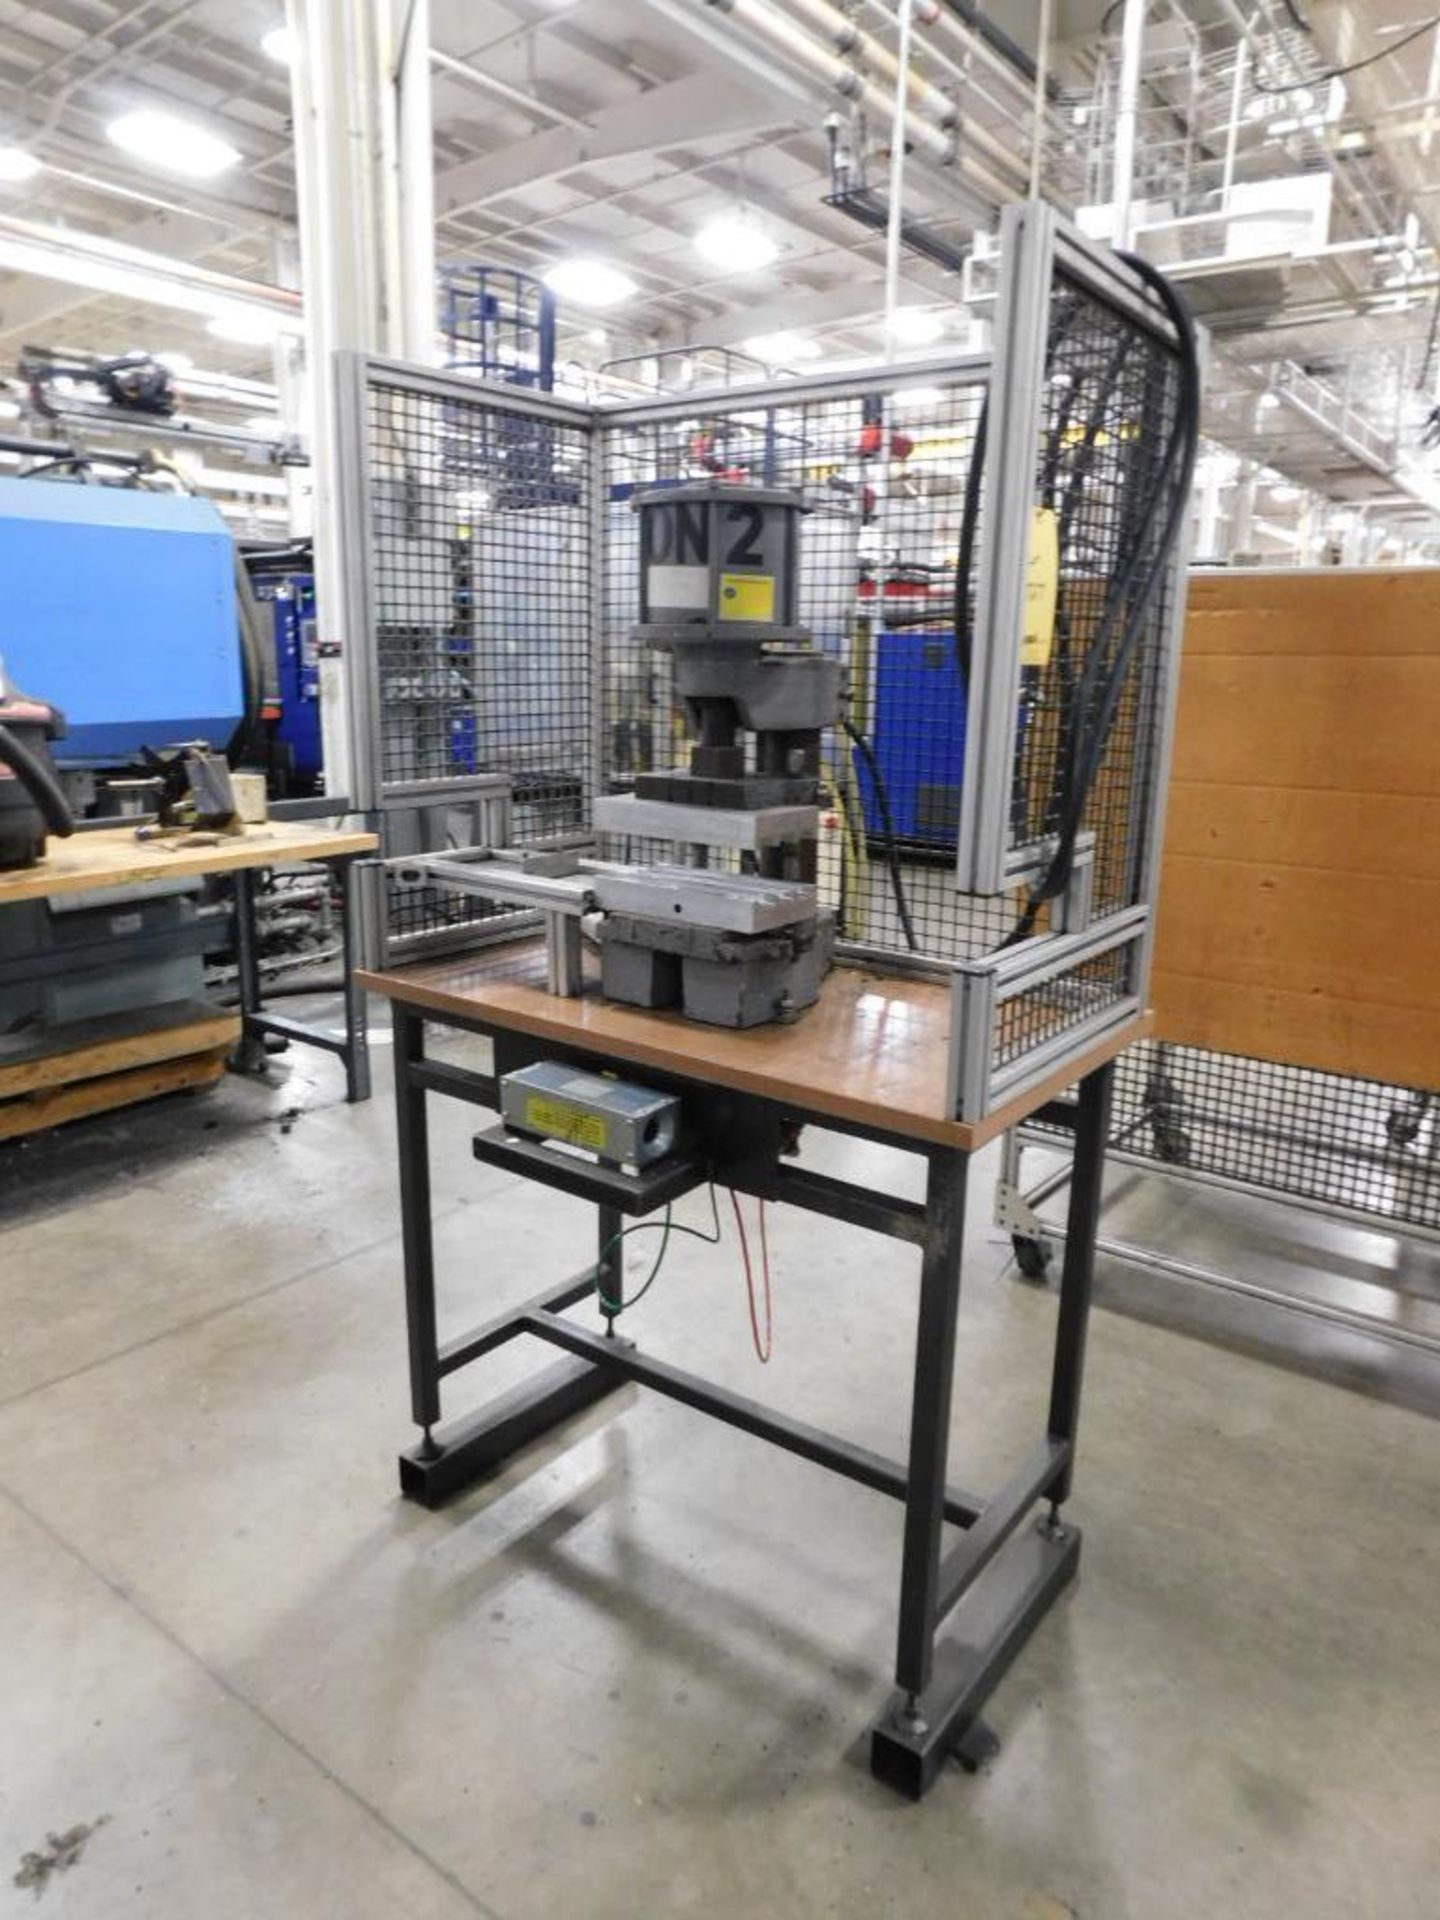 LOT: (8) Work Stations, (2) Punch Presses, (2) Drying Stations, Drilling Station, Glue Station, etc. - Image 11 of 16